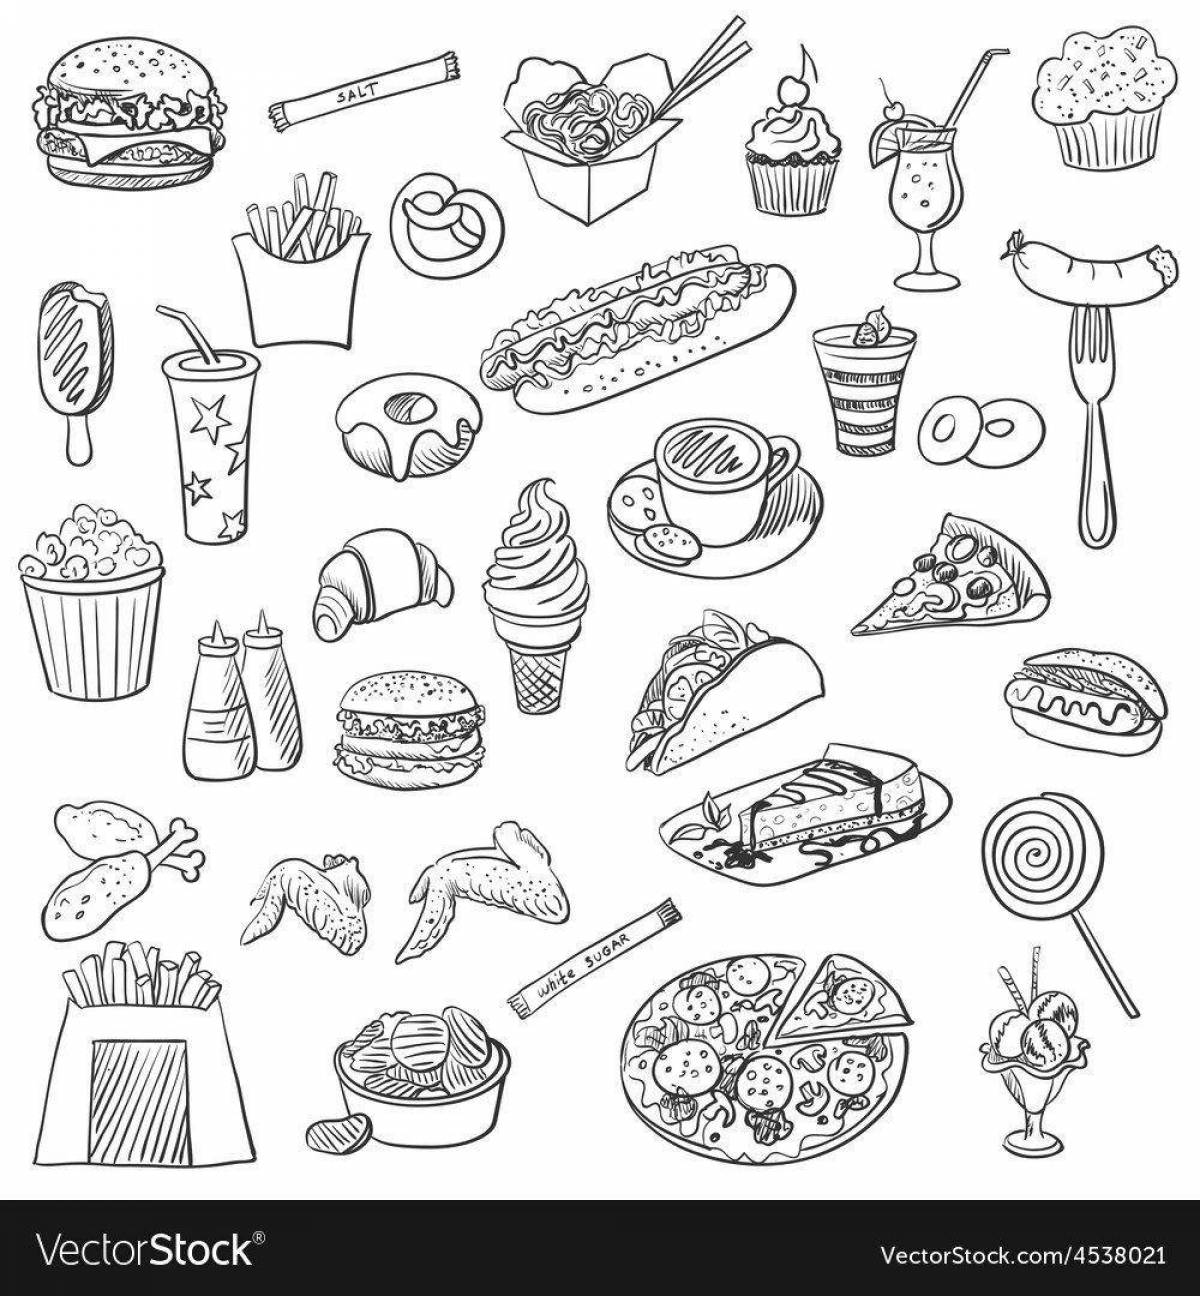 Gourmet doll food coloring page